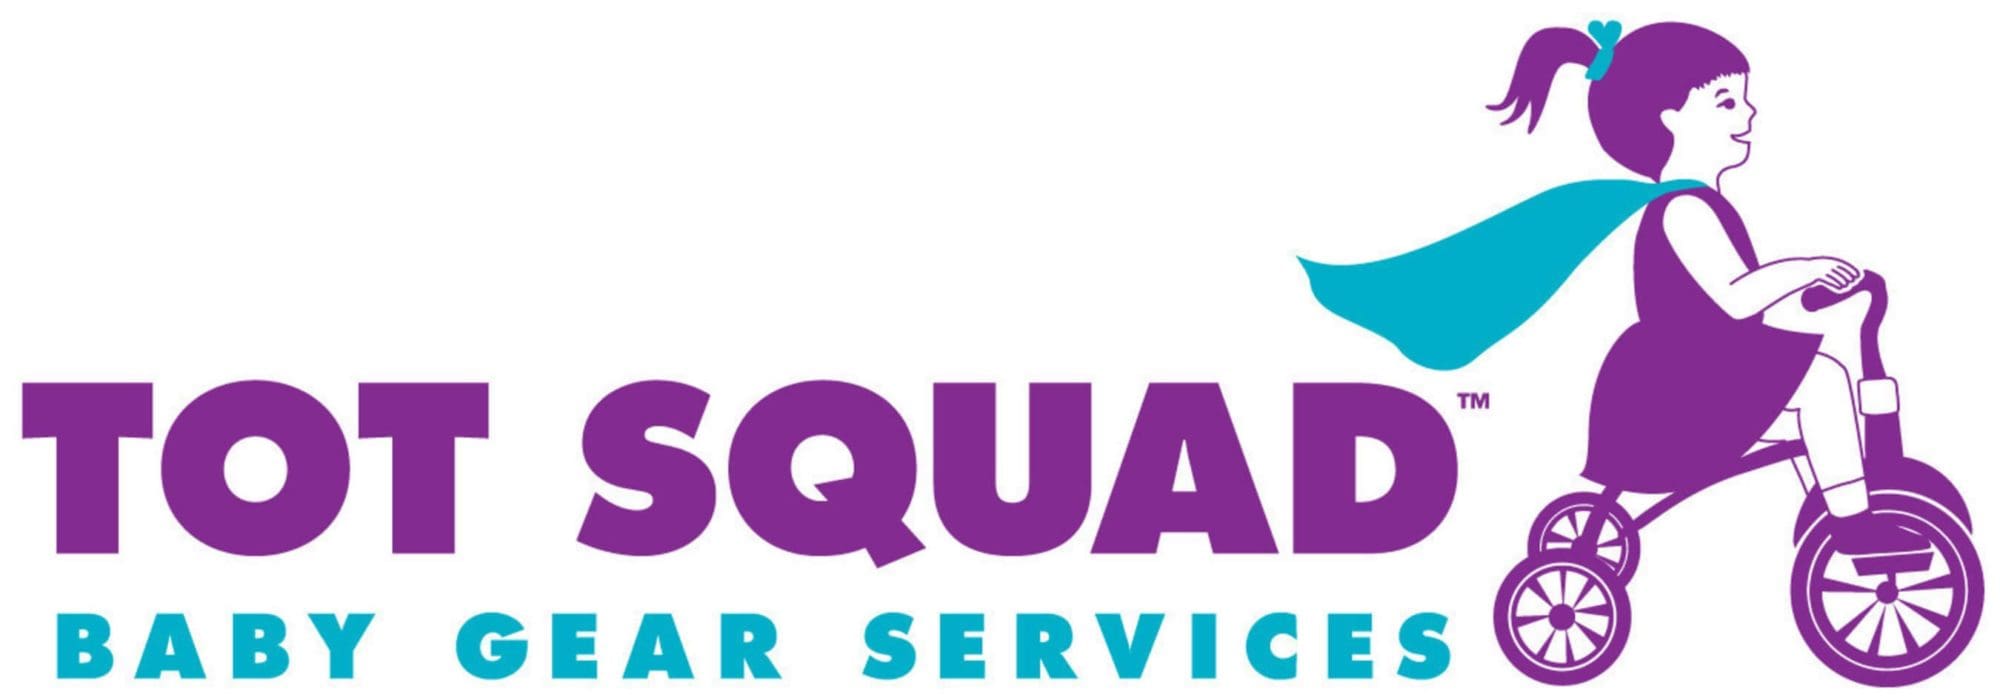 SA&M Client Tot Squad's Baby Gear Cleaning Services Acquired by BabyQuip